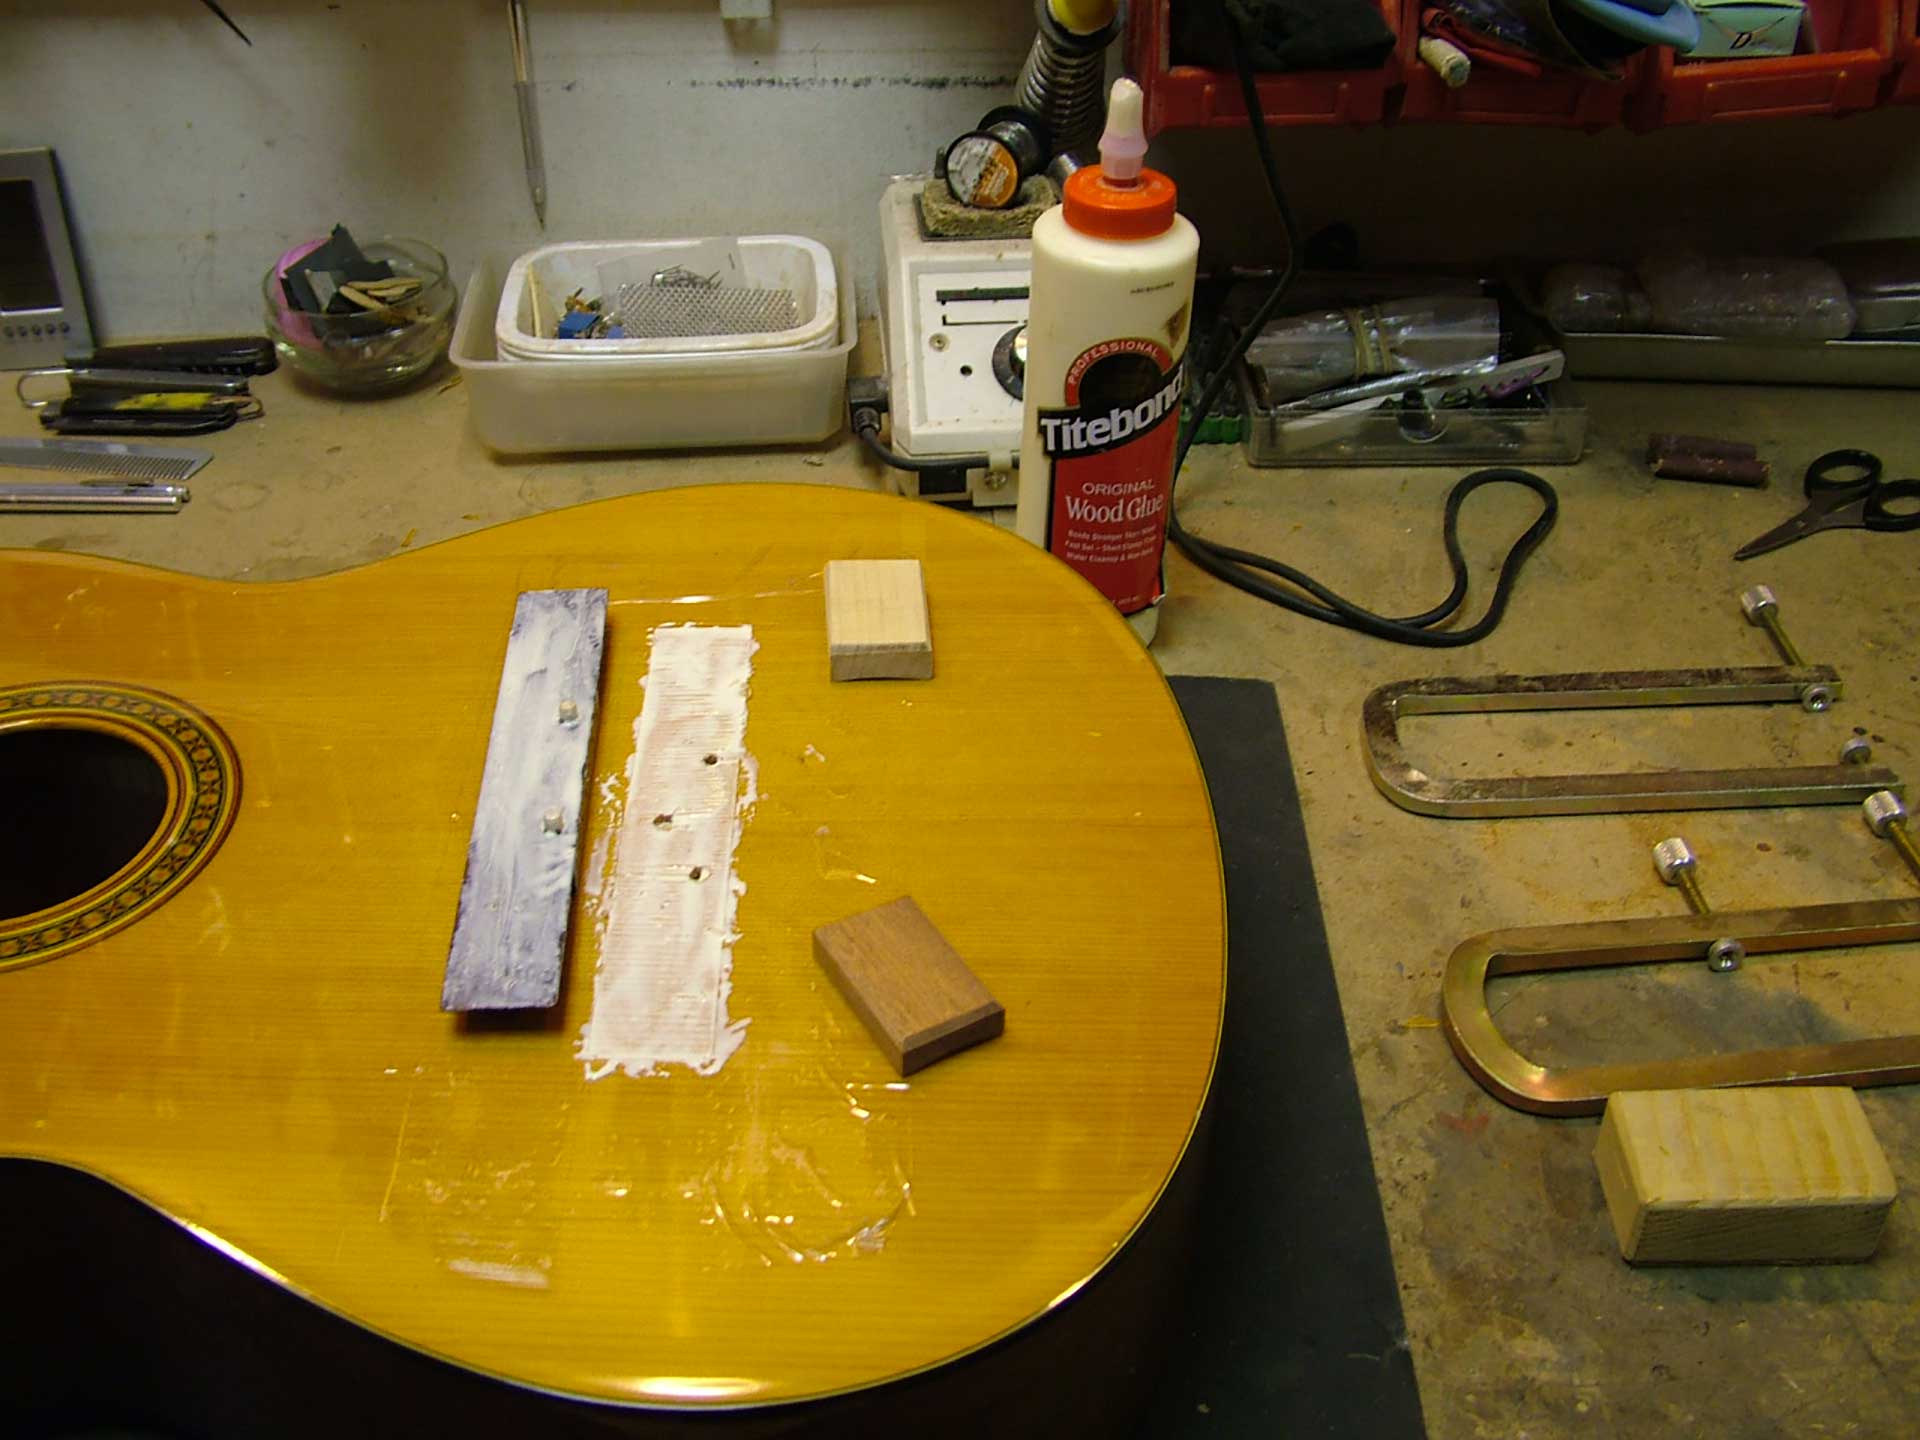 Example of repair performed in the workshop on a classical guitar